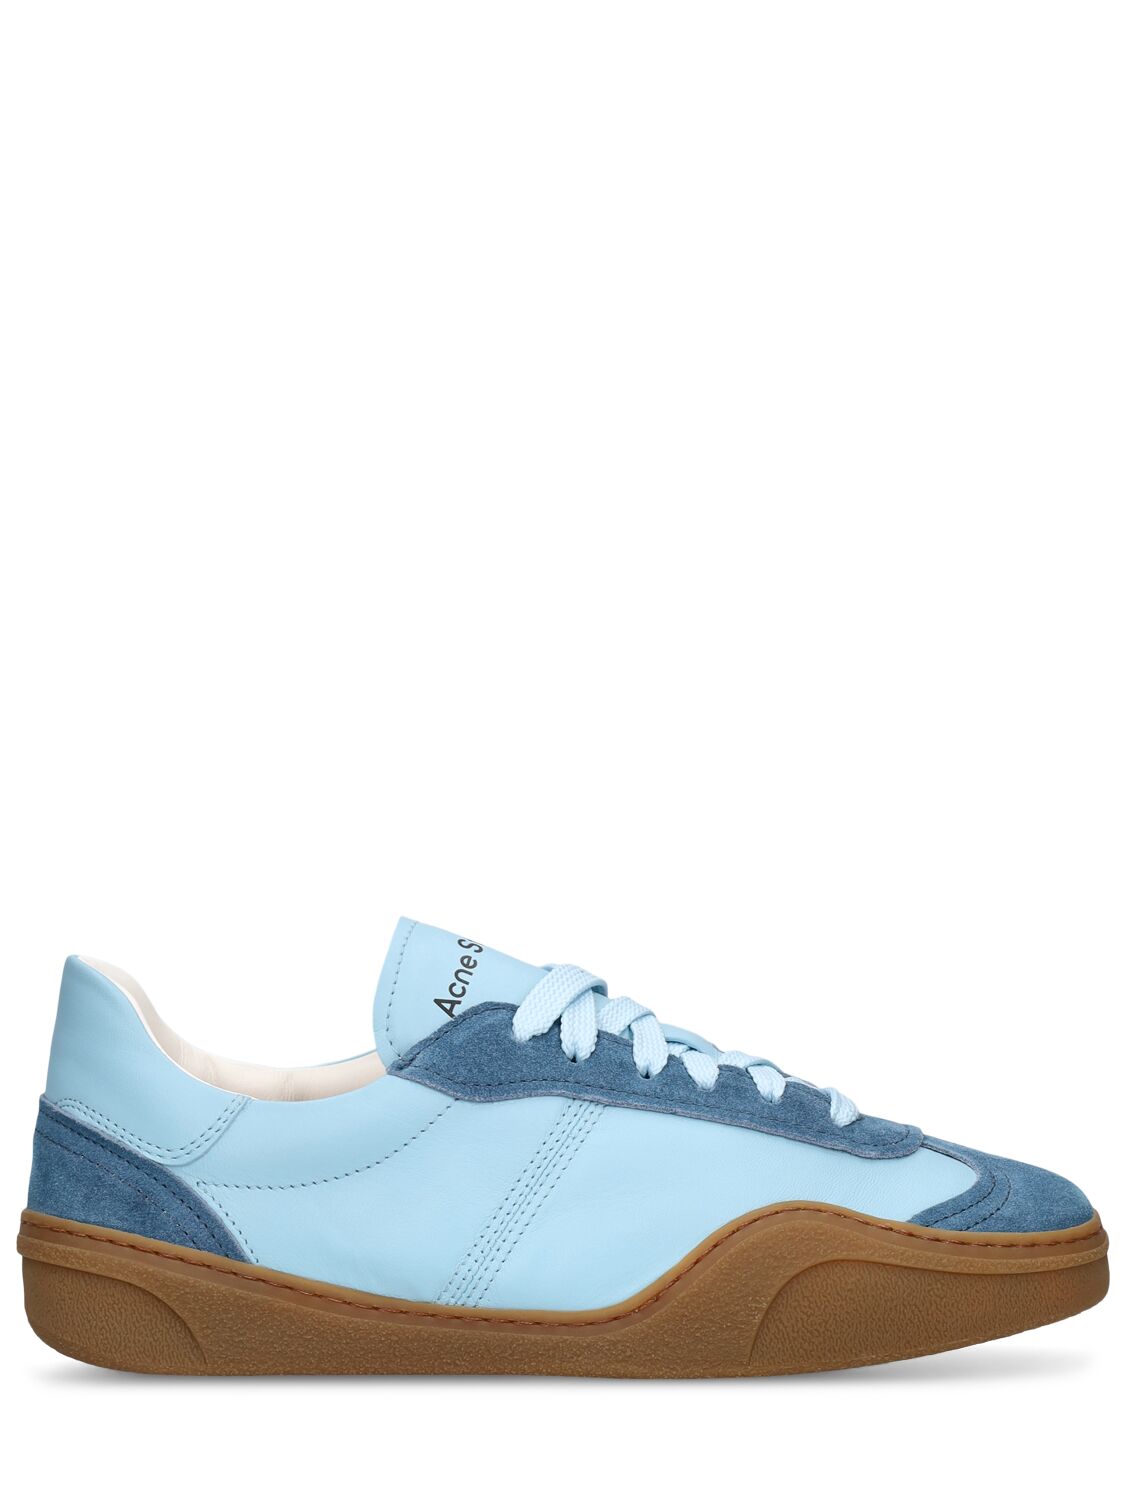 Acne Studios Bars Leather Sneakers In Blue